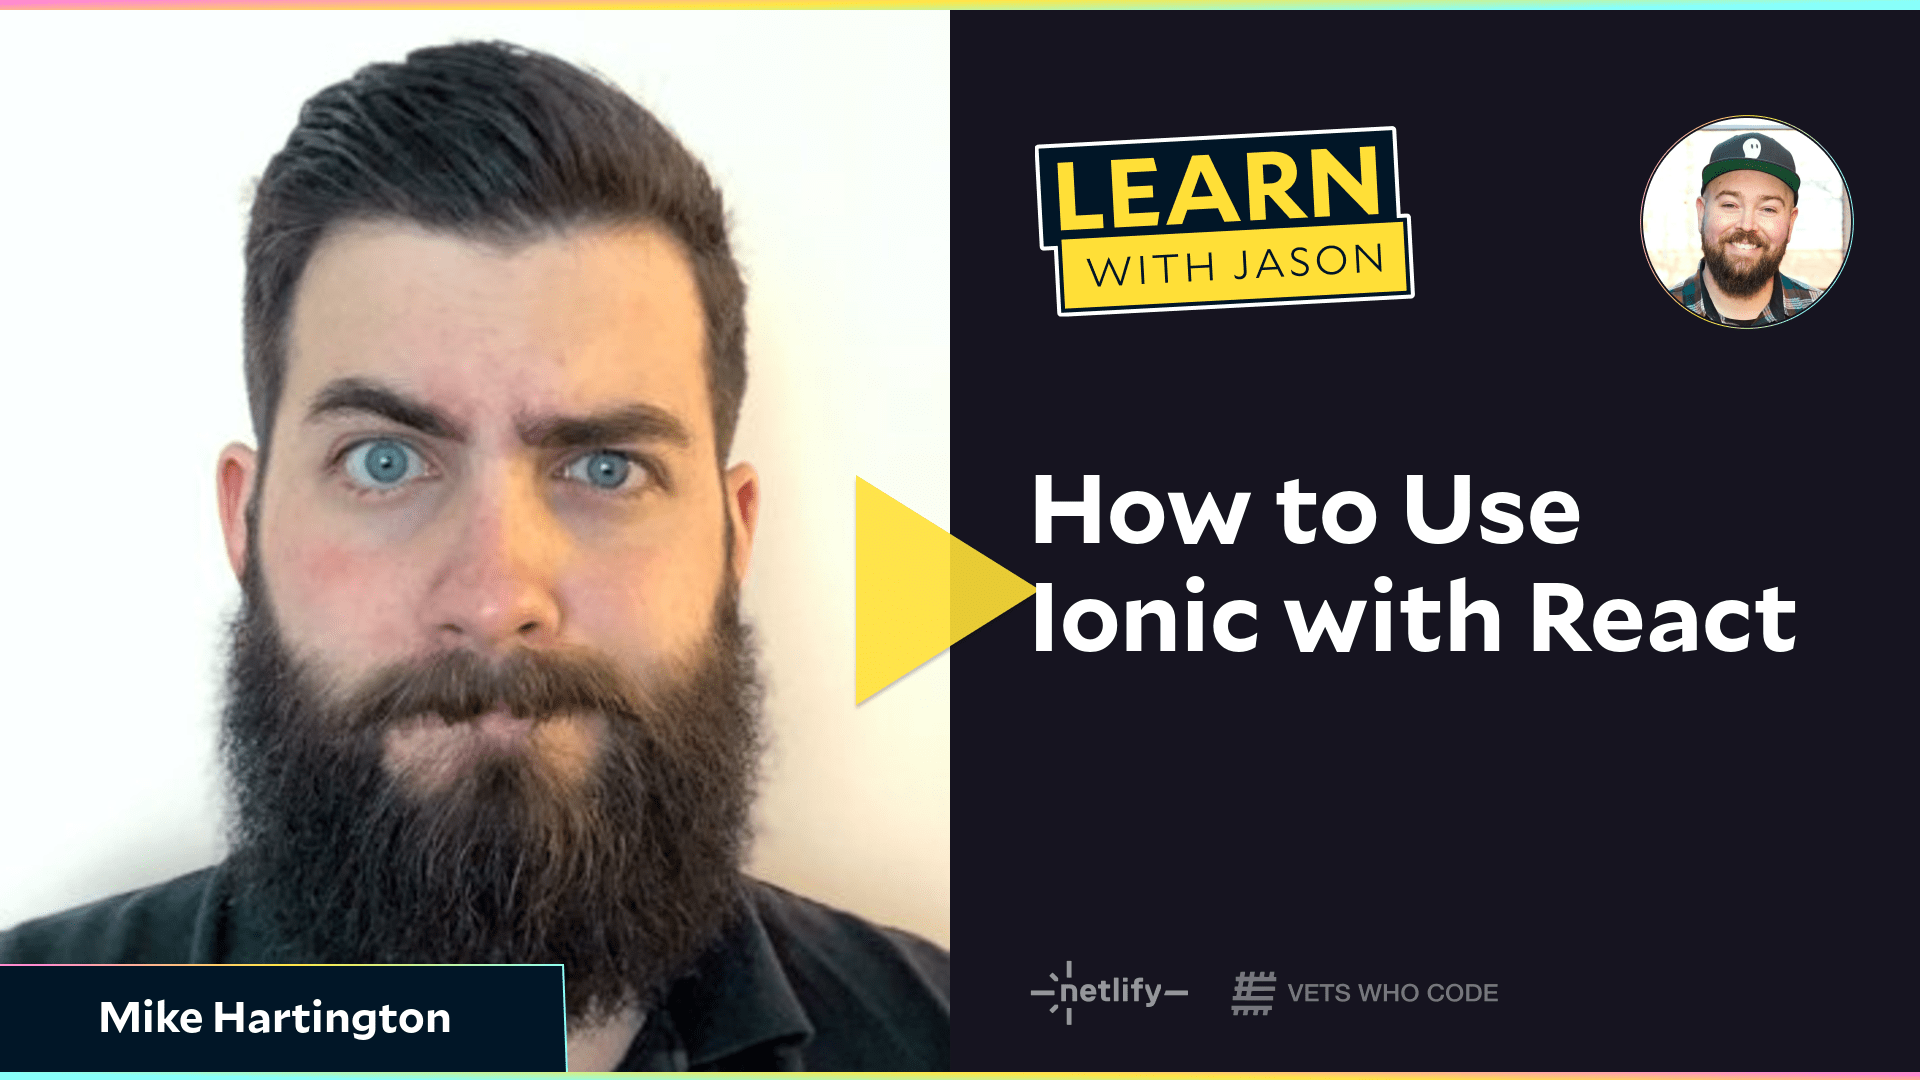 How to Use Ionic with React (with Mike Hartington)